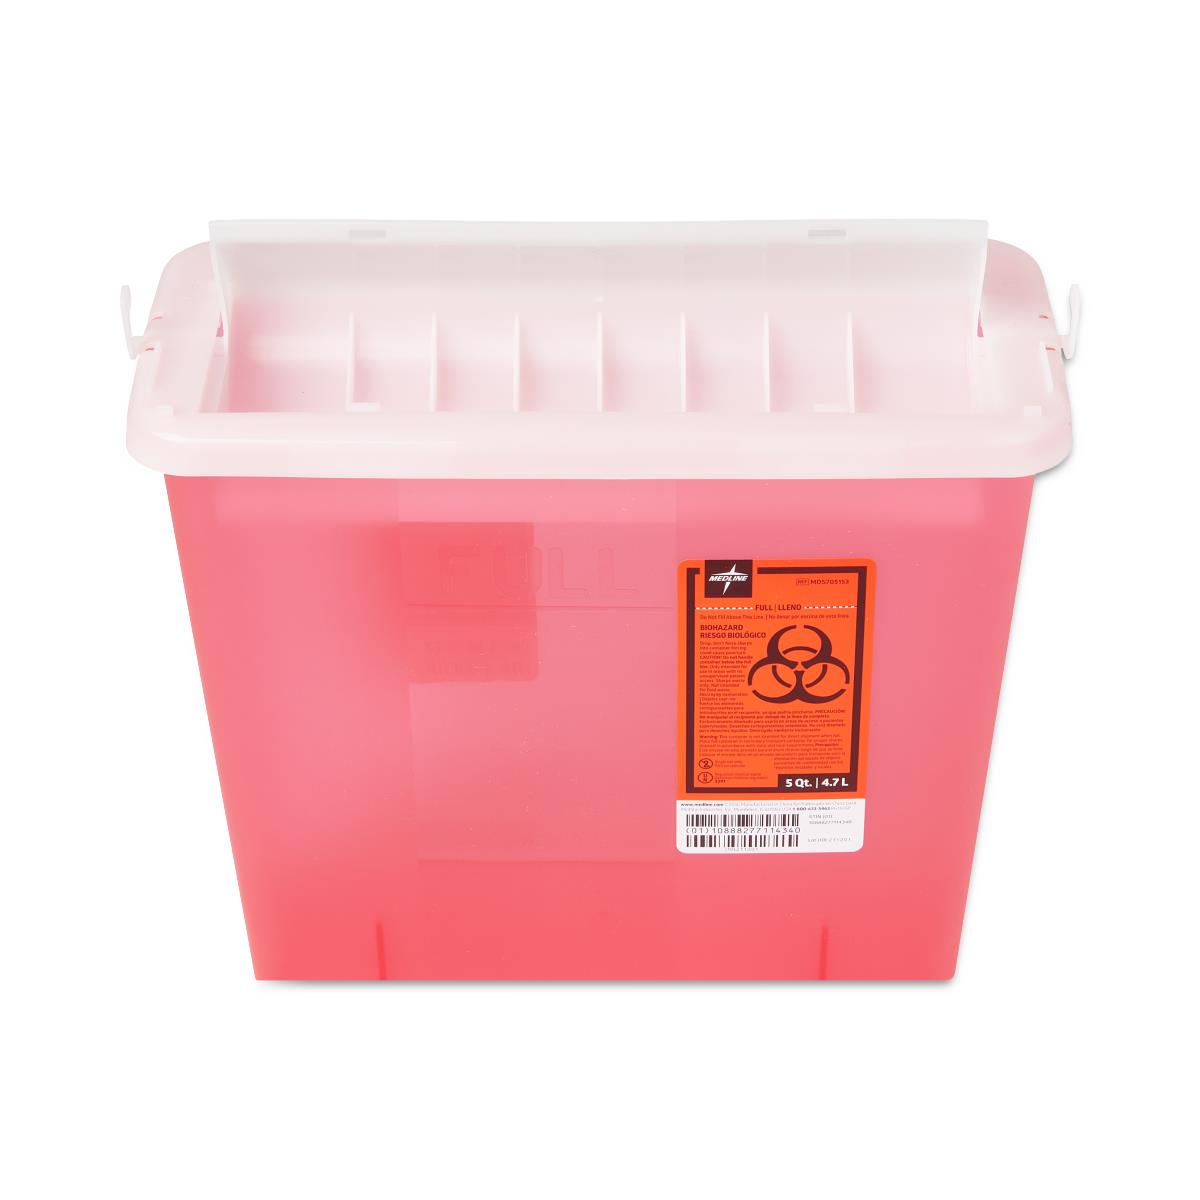 Wall Mount Sharps Container, 5qt